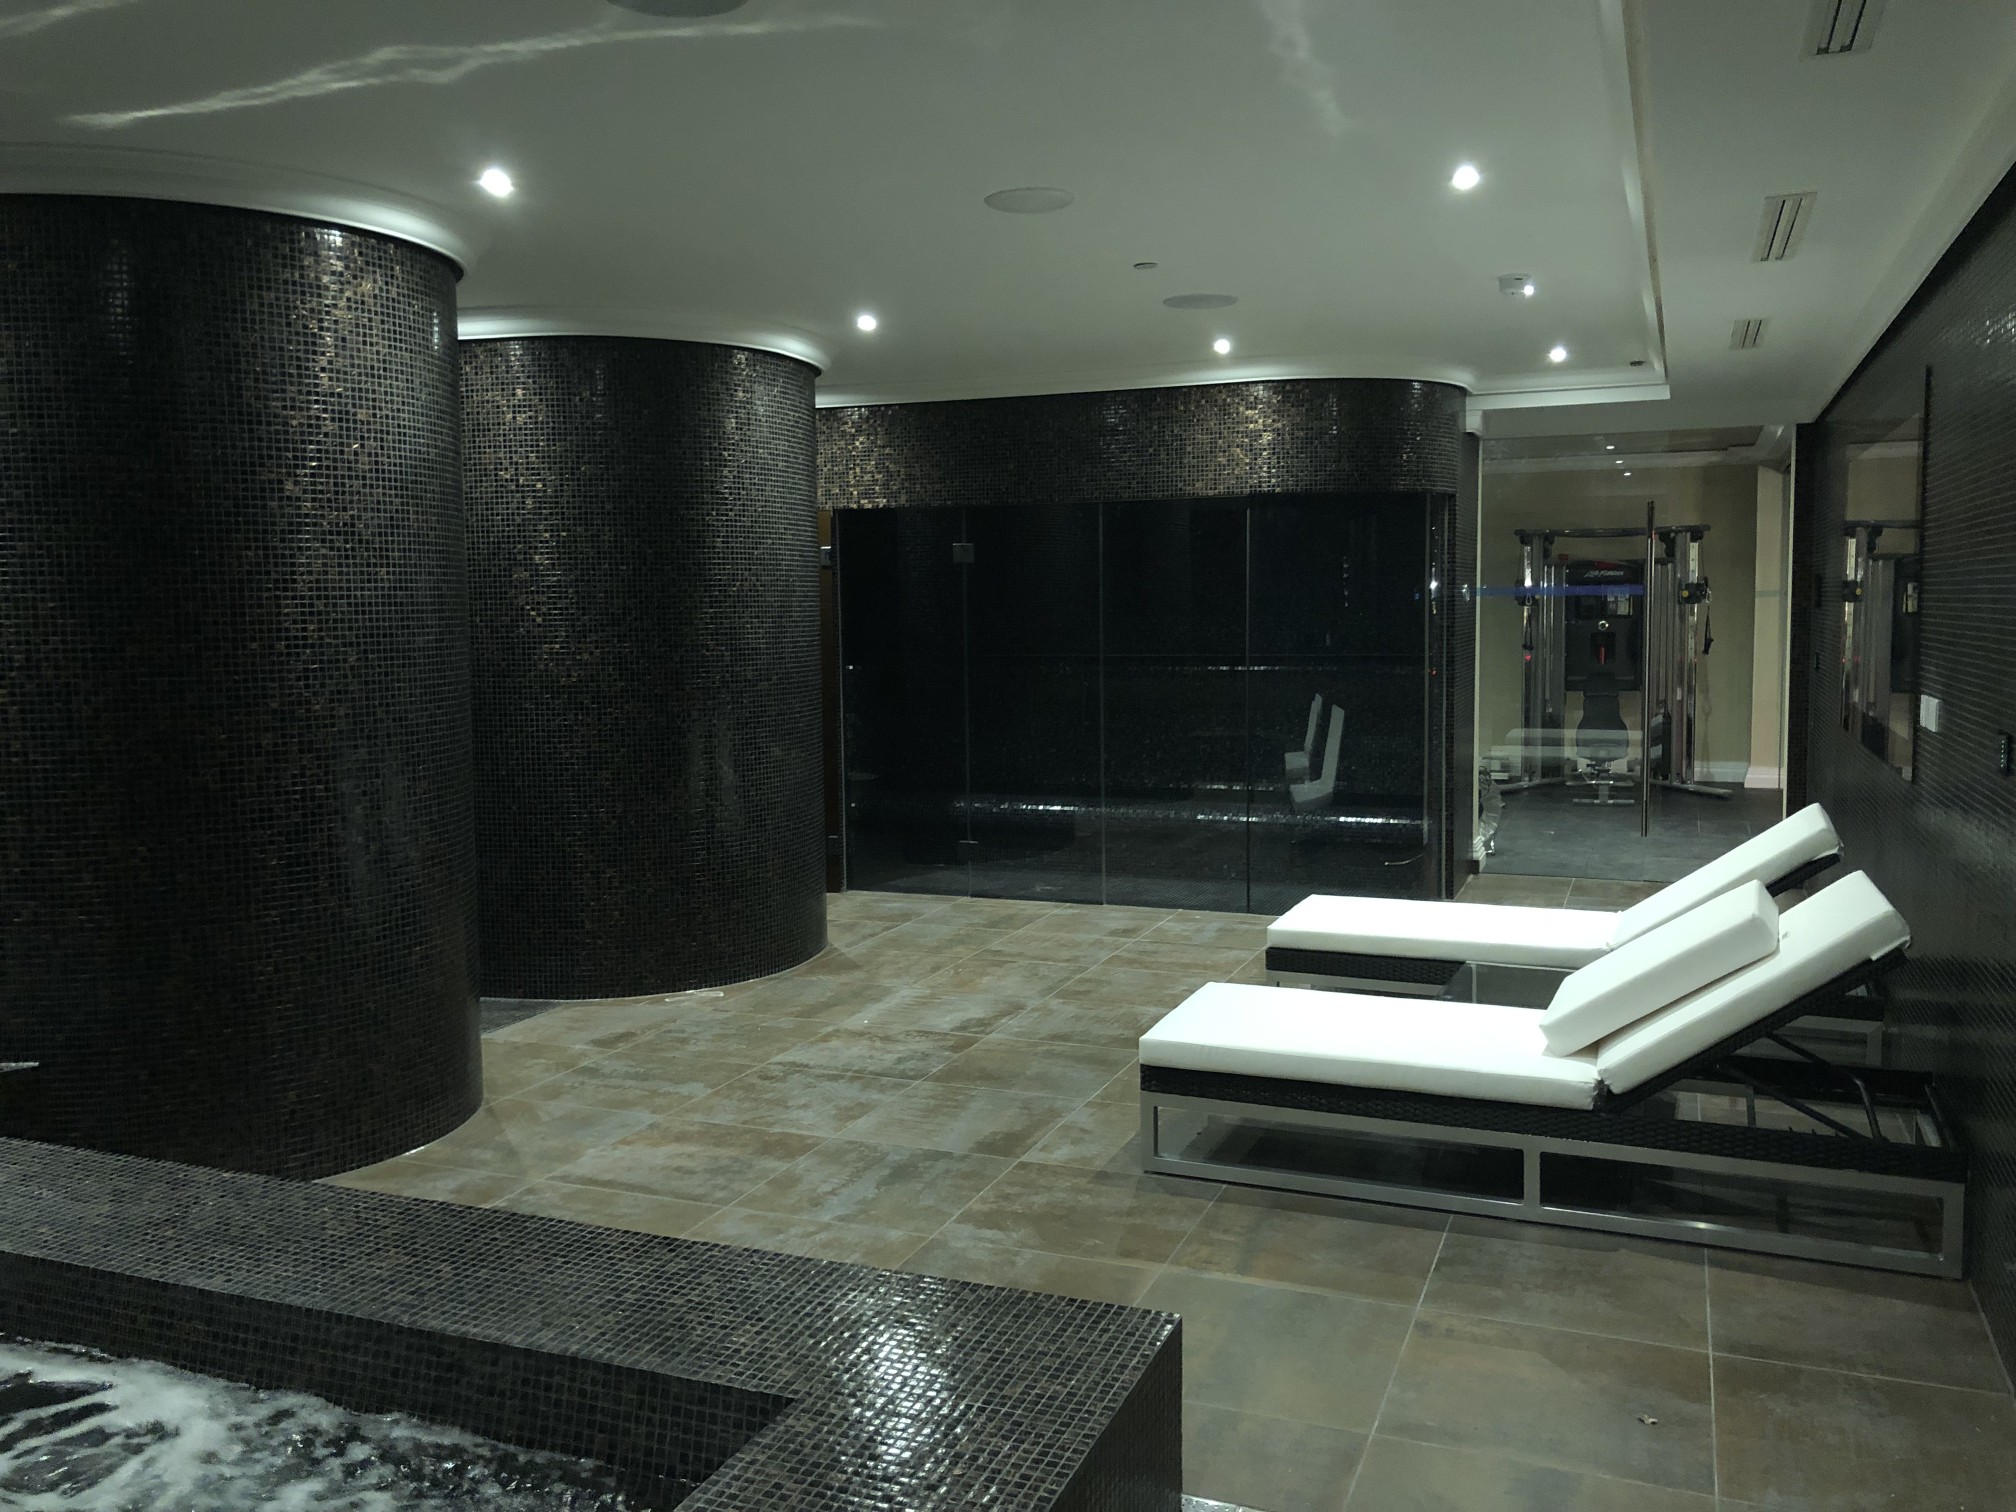 Spa area showcasing ceiling lighting and speakers